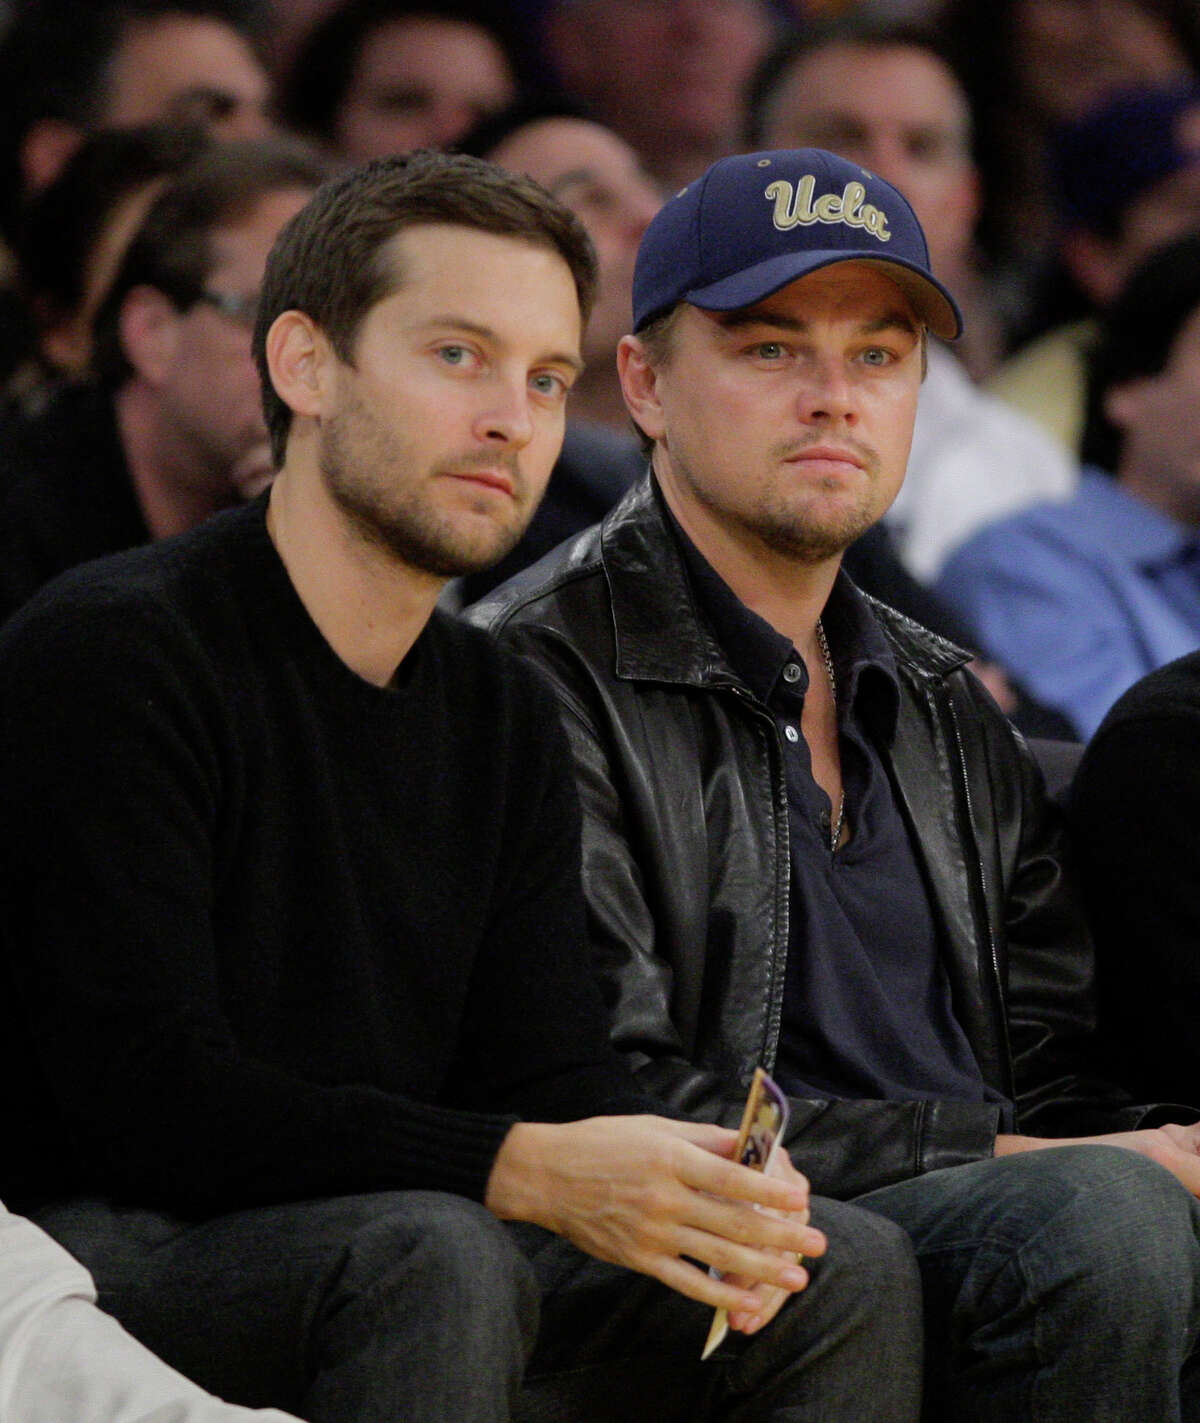 Actors Tobey Maguire (left) and Leonardo DiCaprio are among the stars participating in a public service announcement urging young voters to post tweets, photos and videos about concerns they think deserve presidential attention.